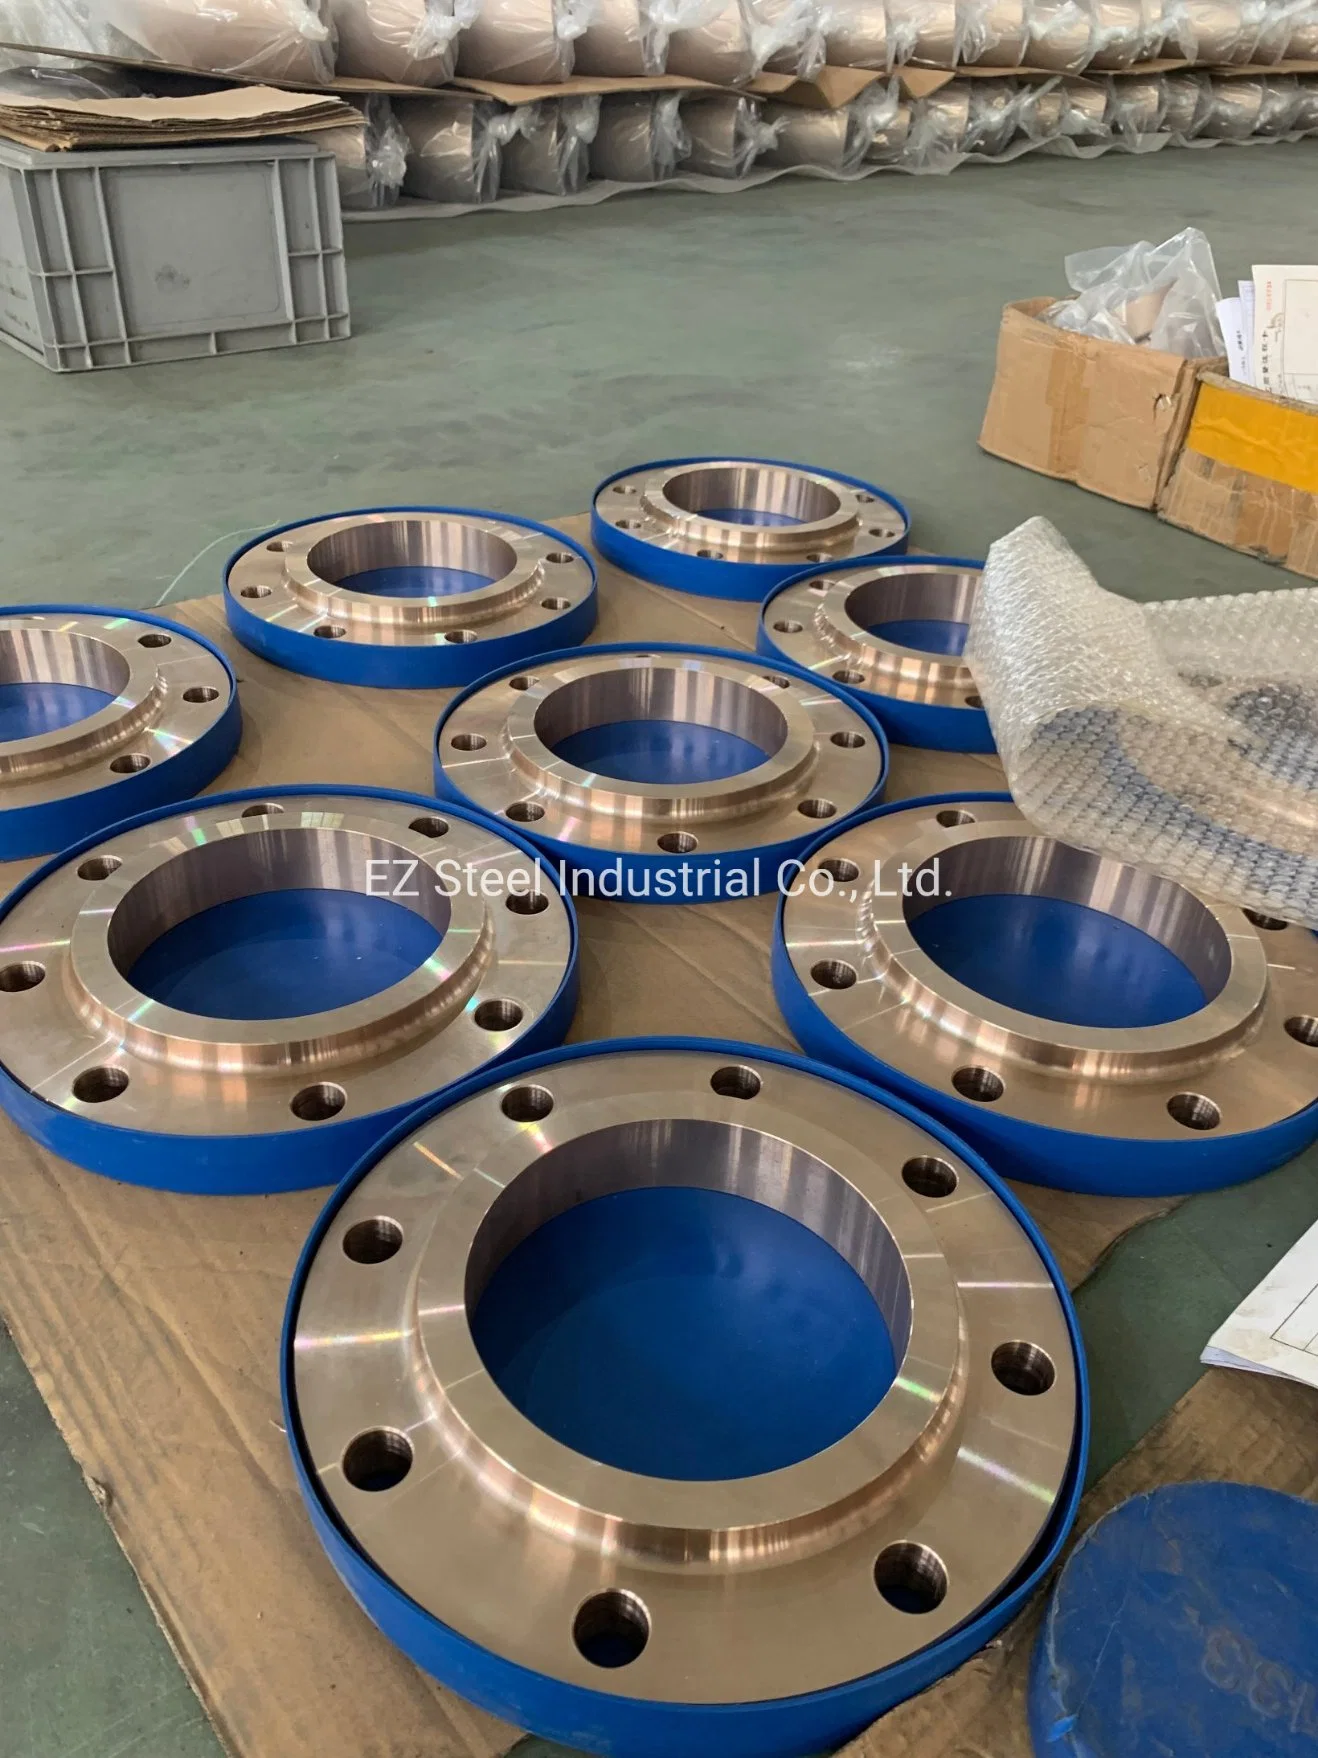 Copper CuNi 90/10 Coupling/Flange/Reducer/Elbow/Tee/Pipe Fittings